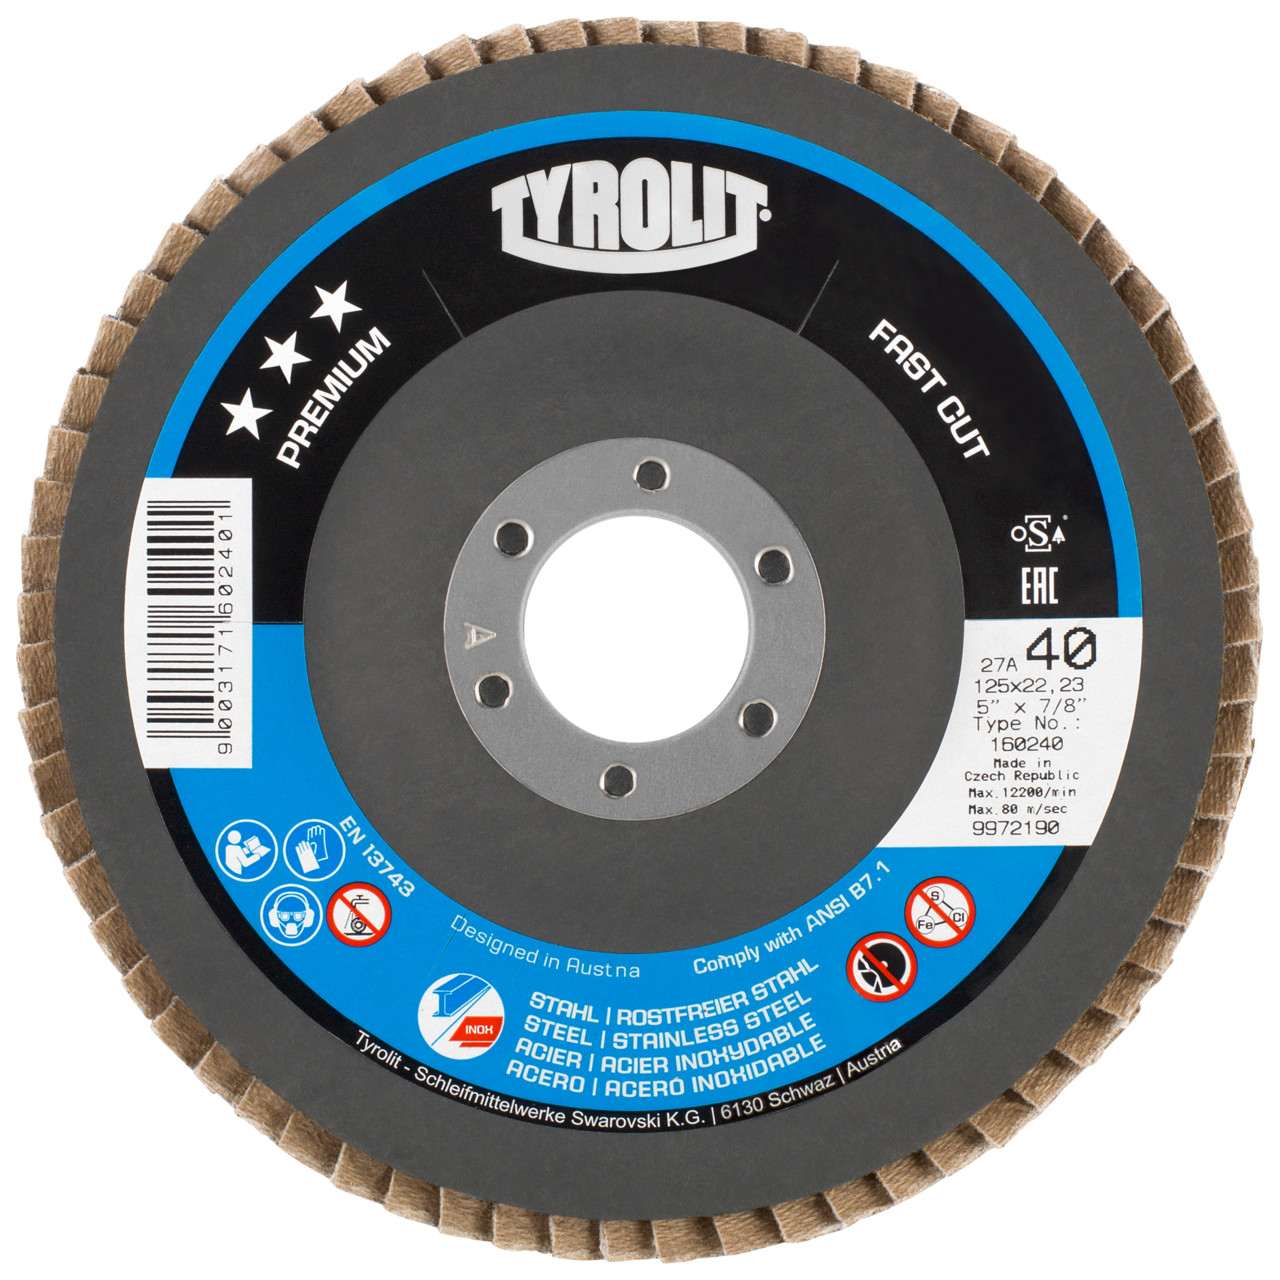 Tyrolit Serrated lock washer DxH 115x22.2 FASTCUT for steel &amp; stainless steel, P60, shape: 28A - straight version (glass fibre carrier body version), Art. 160251